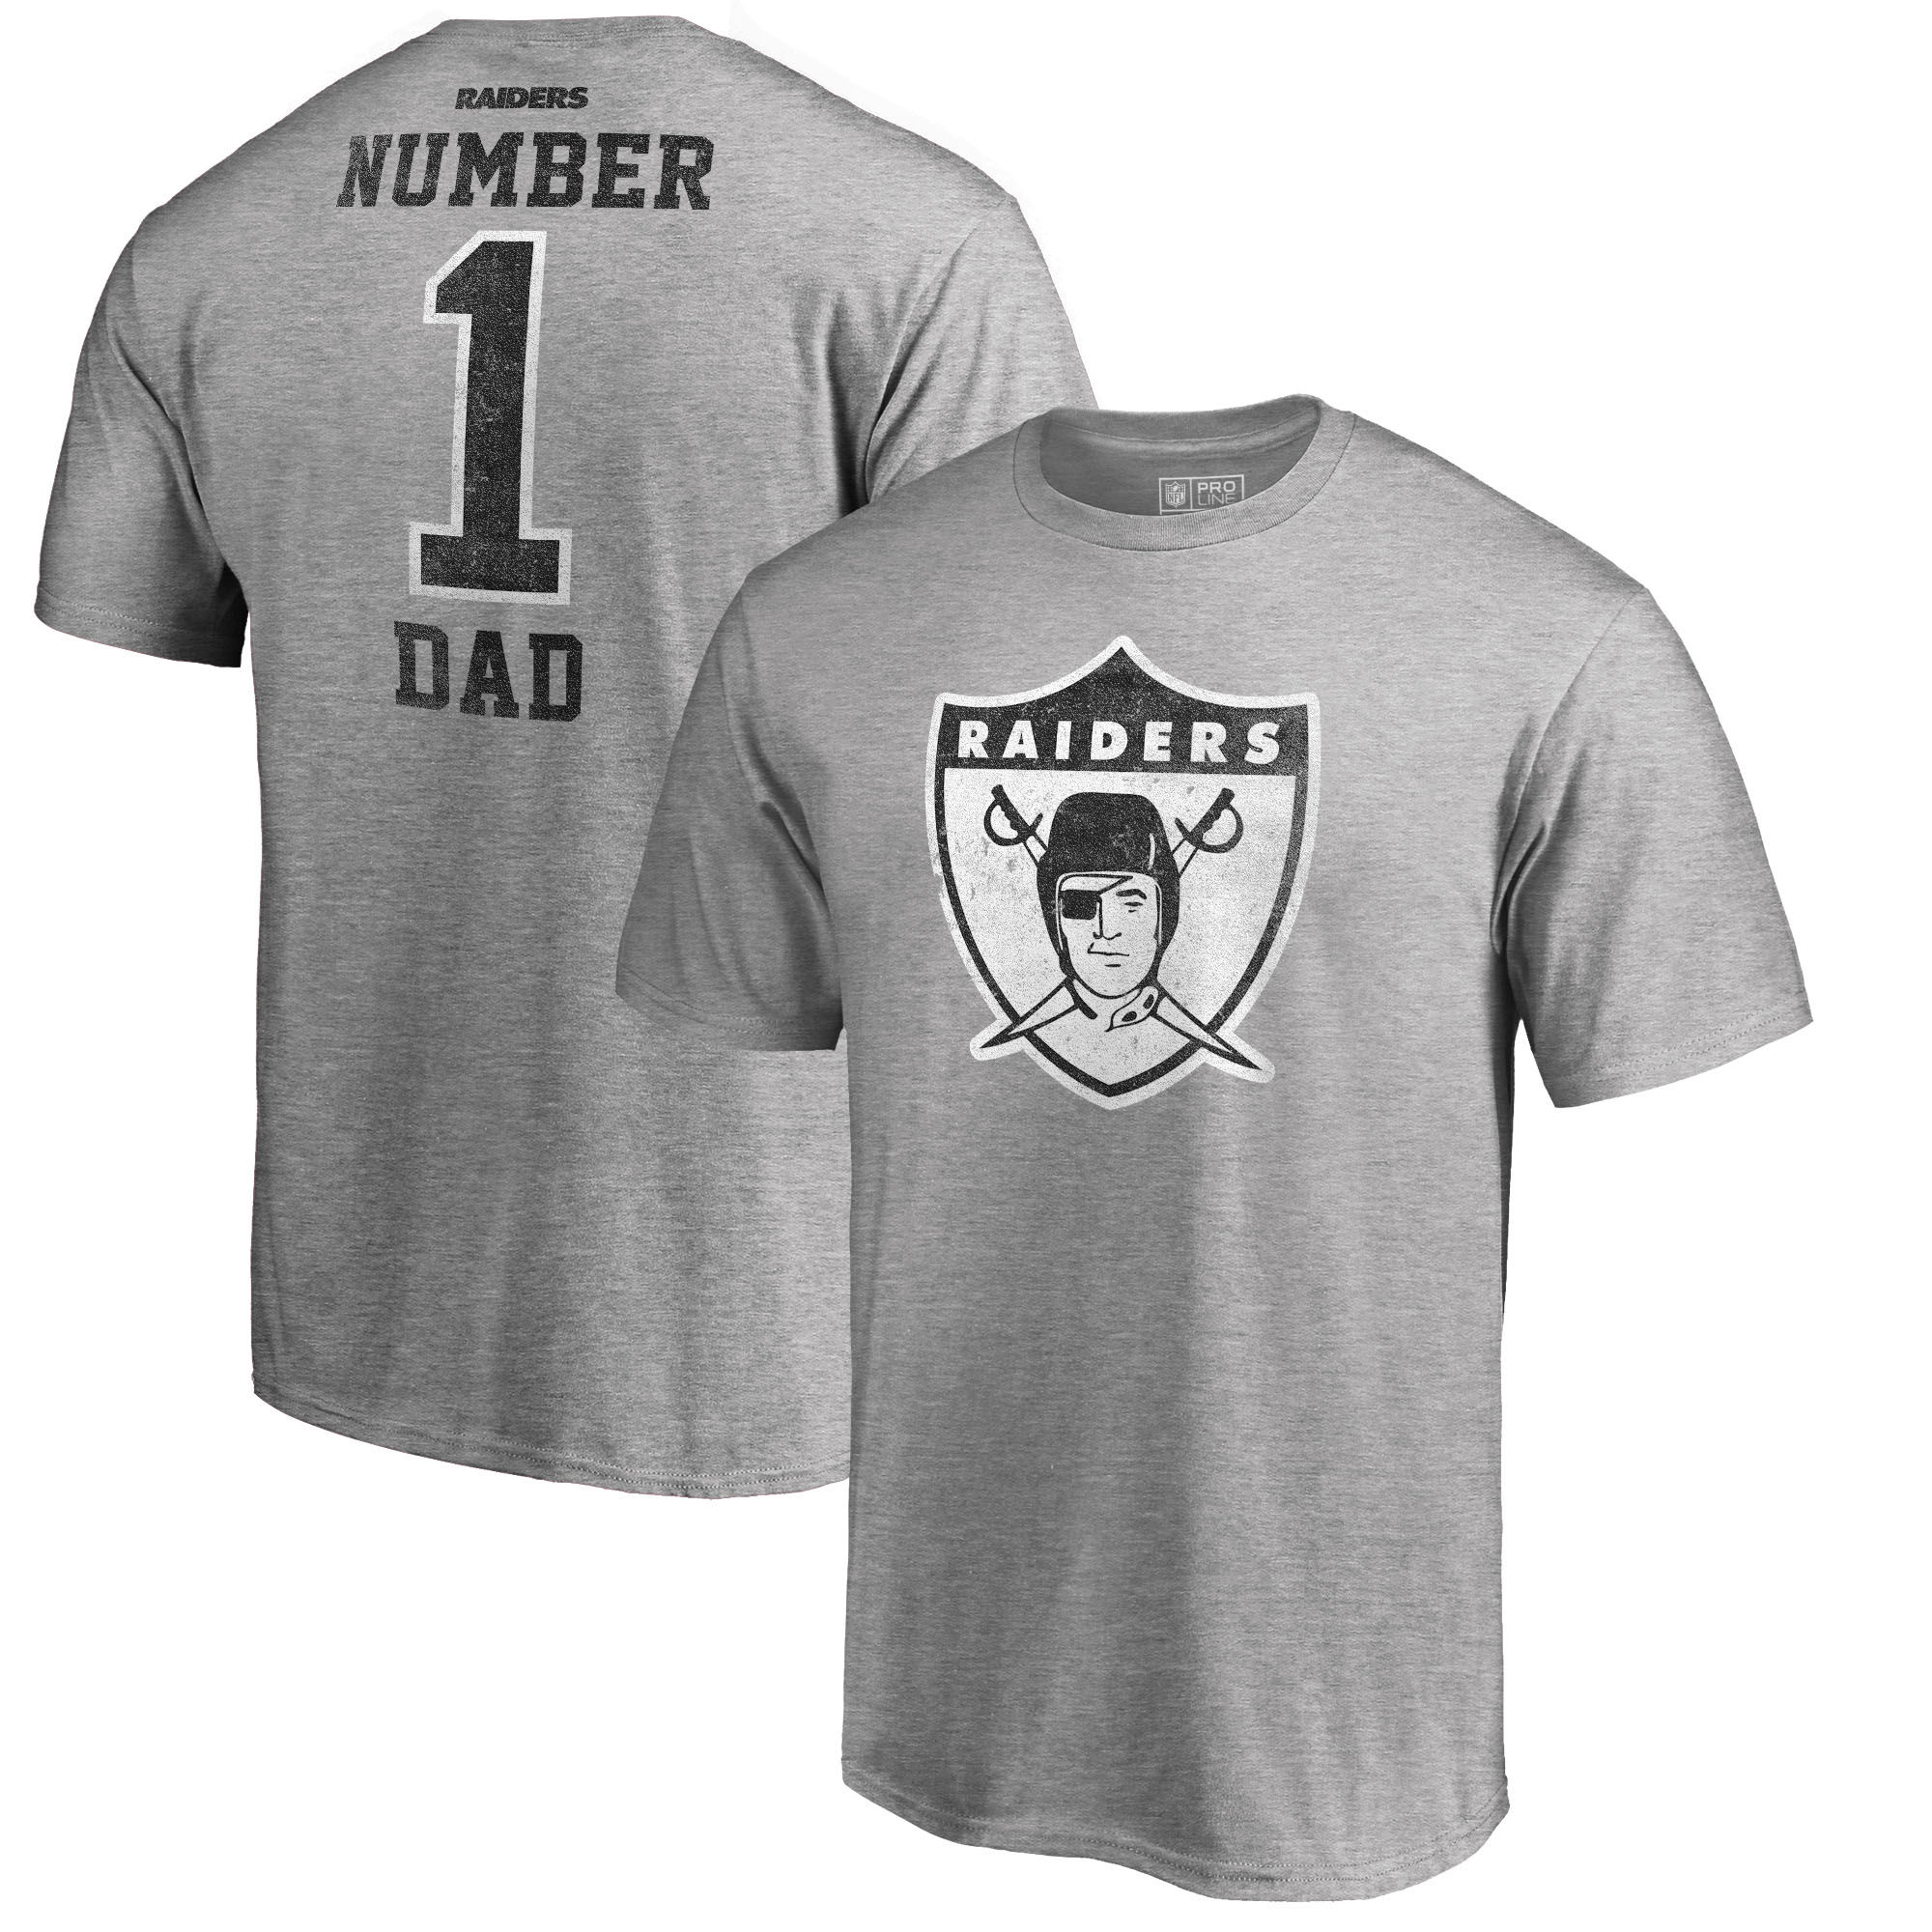 Oakland Raiders NFL Pro Line by Fanatics Branded Heathered Gray Big and Tall Greatest Dad Retro Tri-Blend T-Shirt